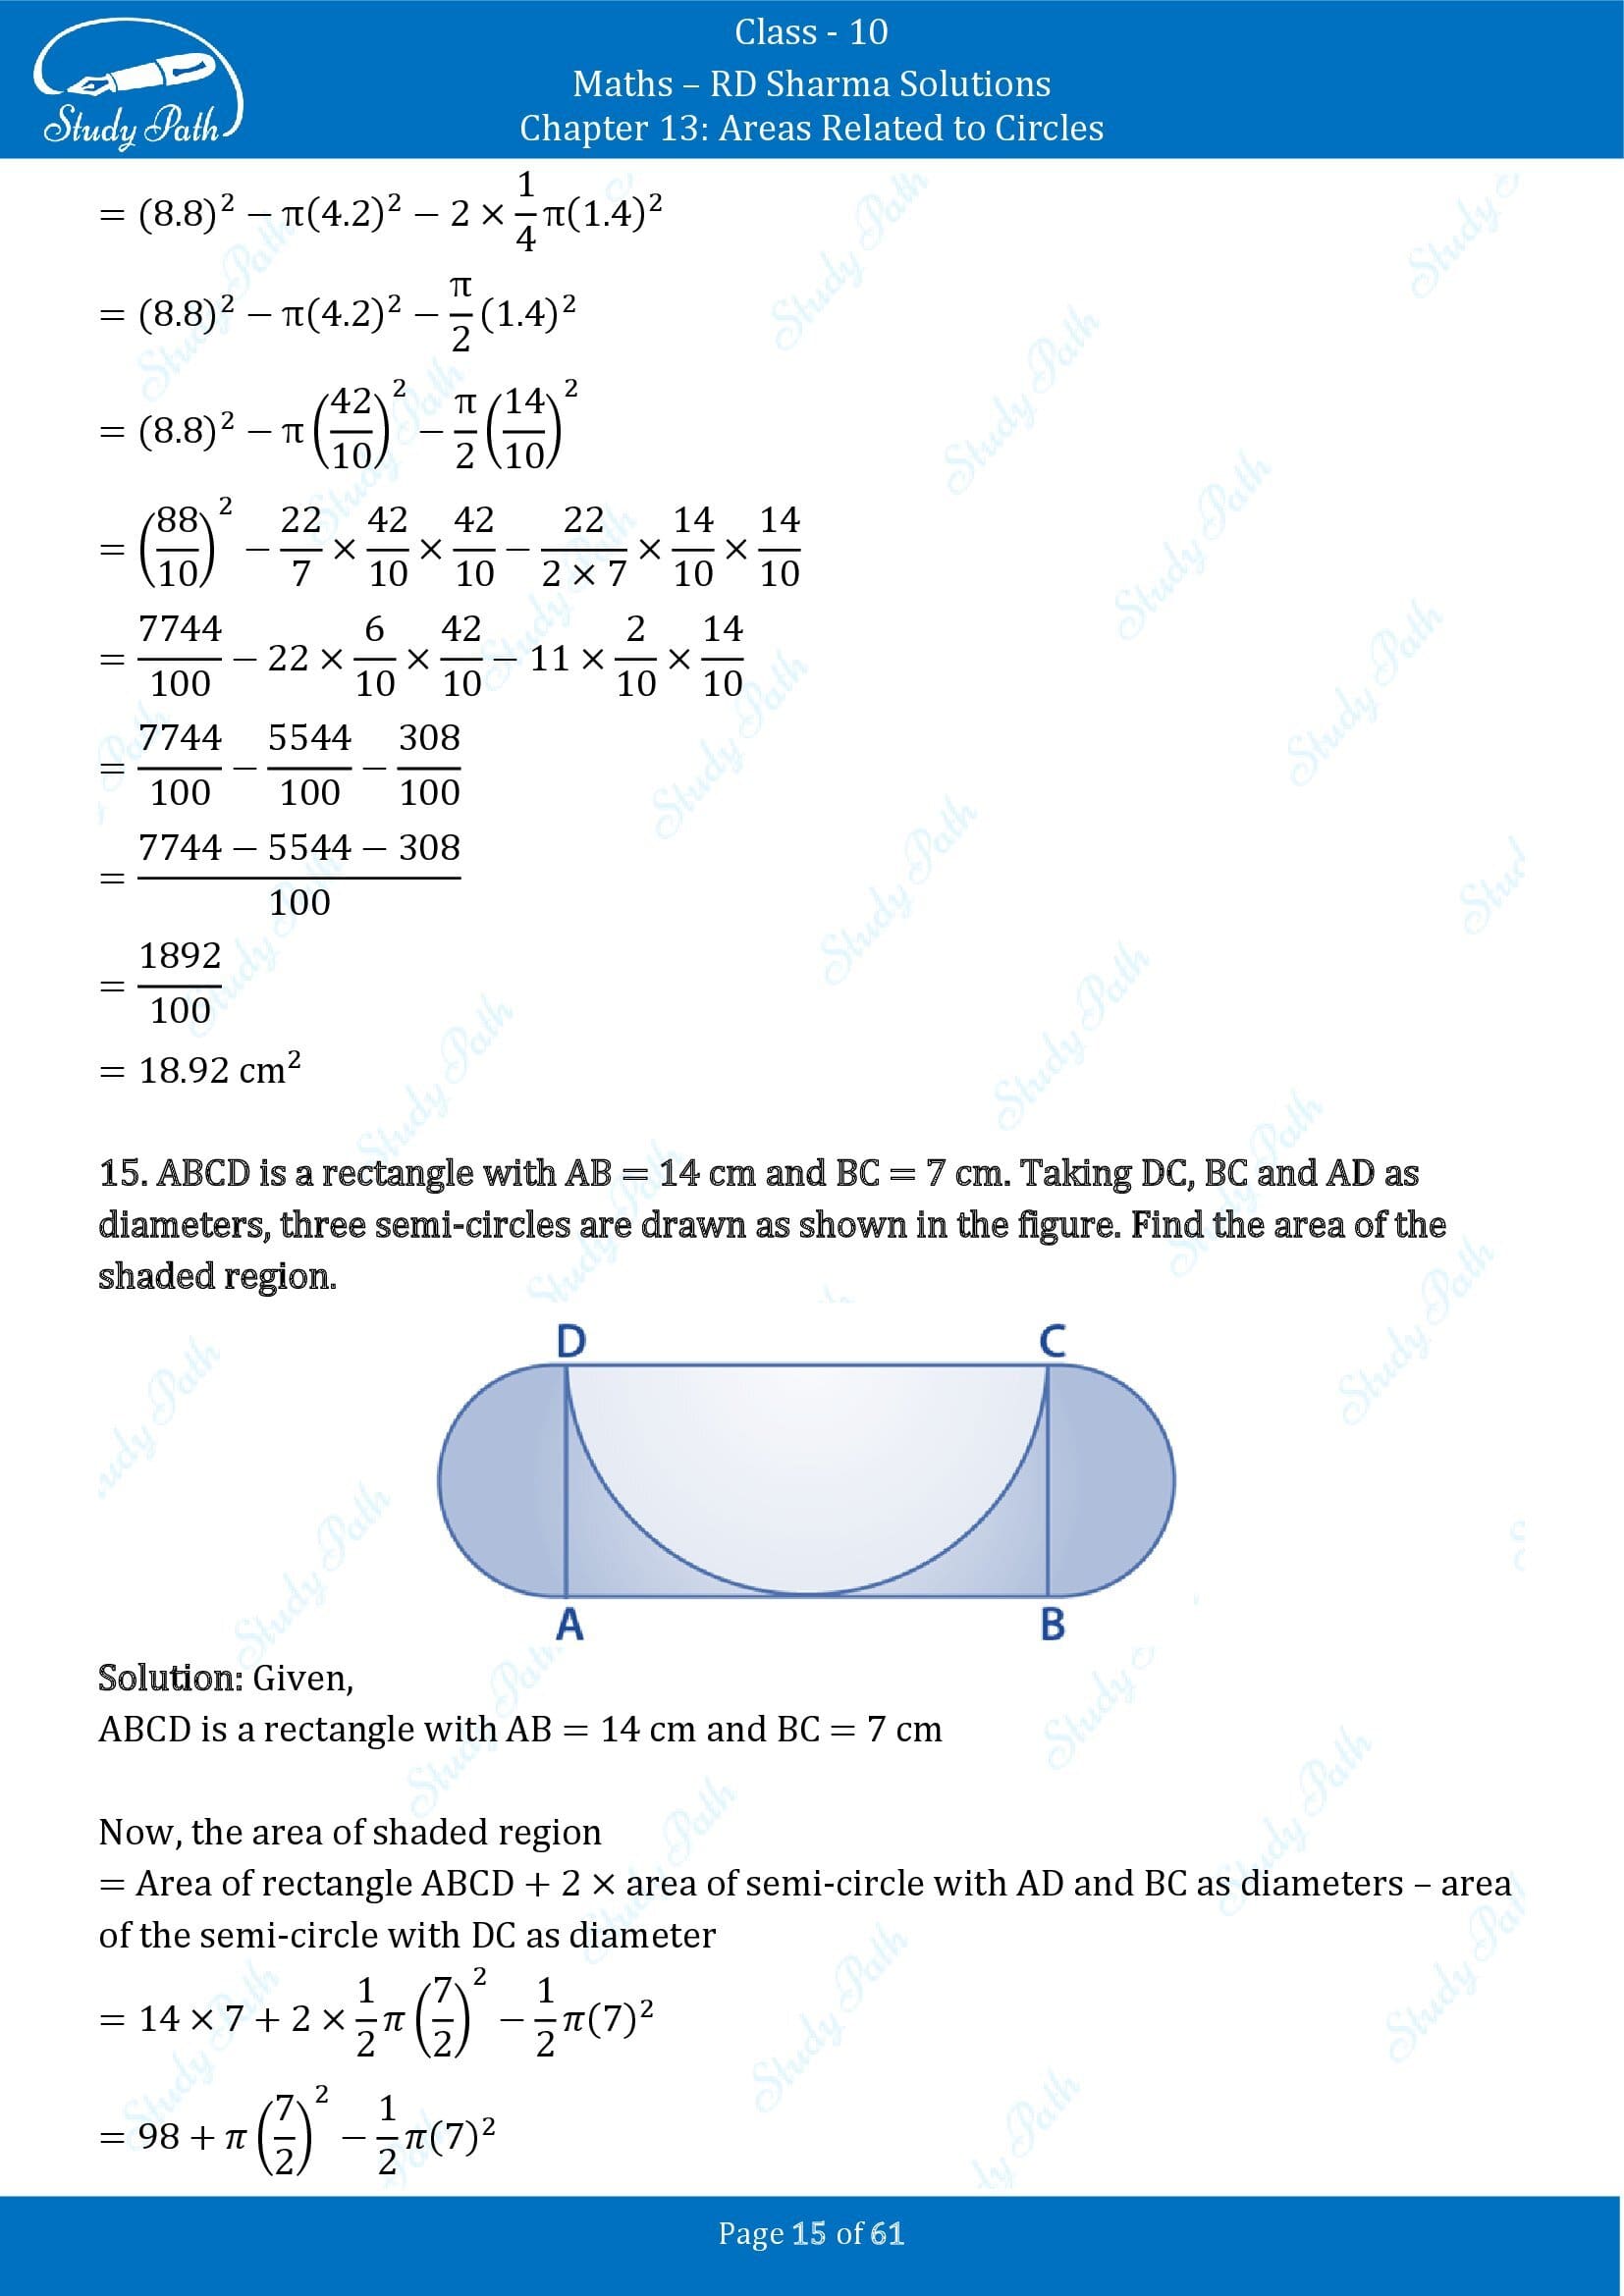 RD Sharma Solutions Class 10 Chapter 13 Areas Related to Circles Exercise 13.4 00015